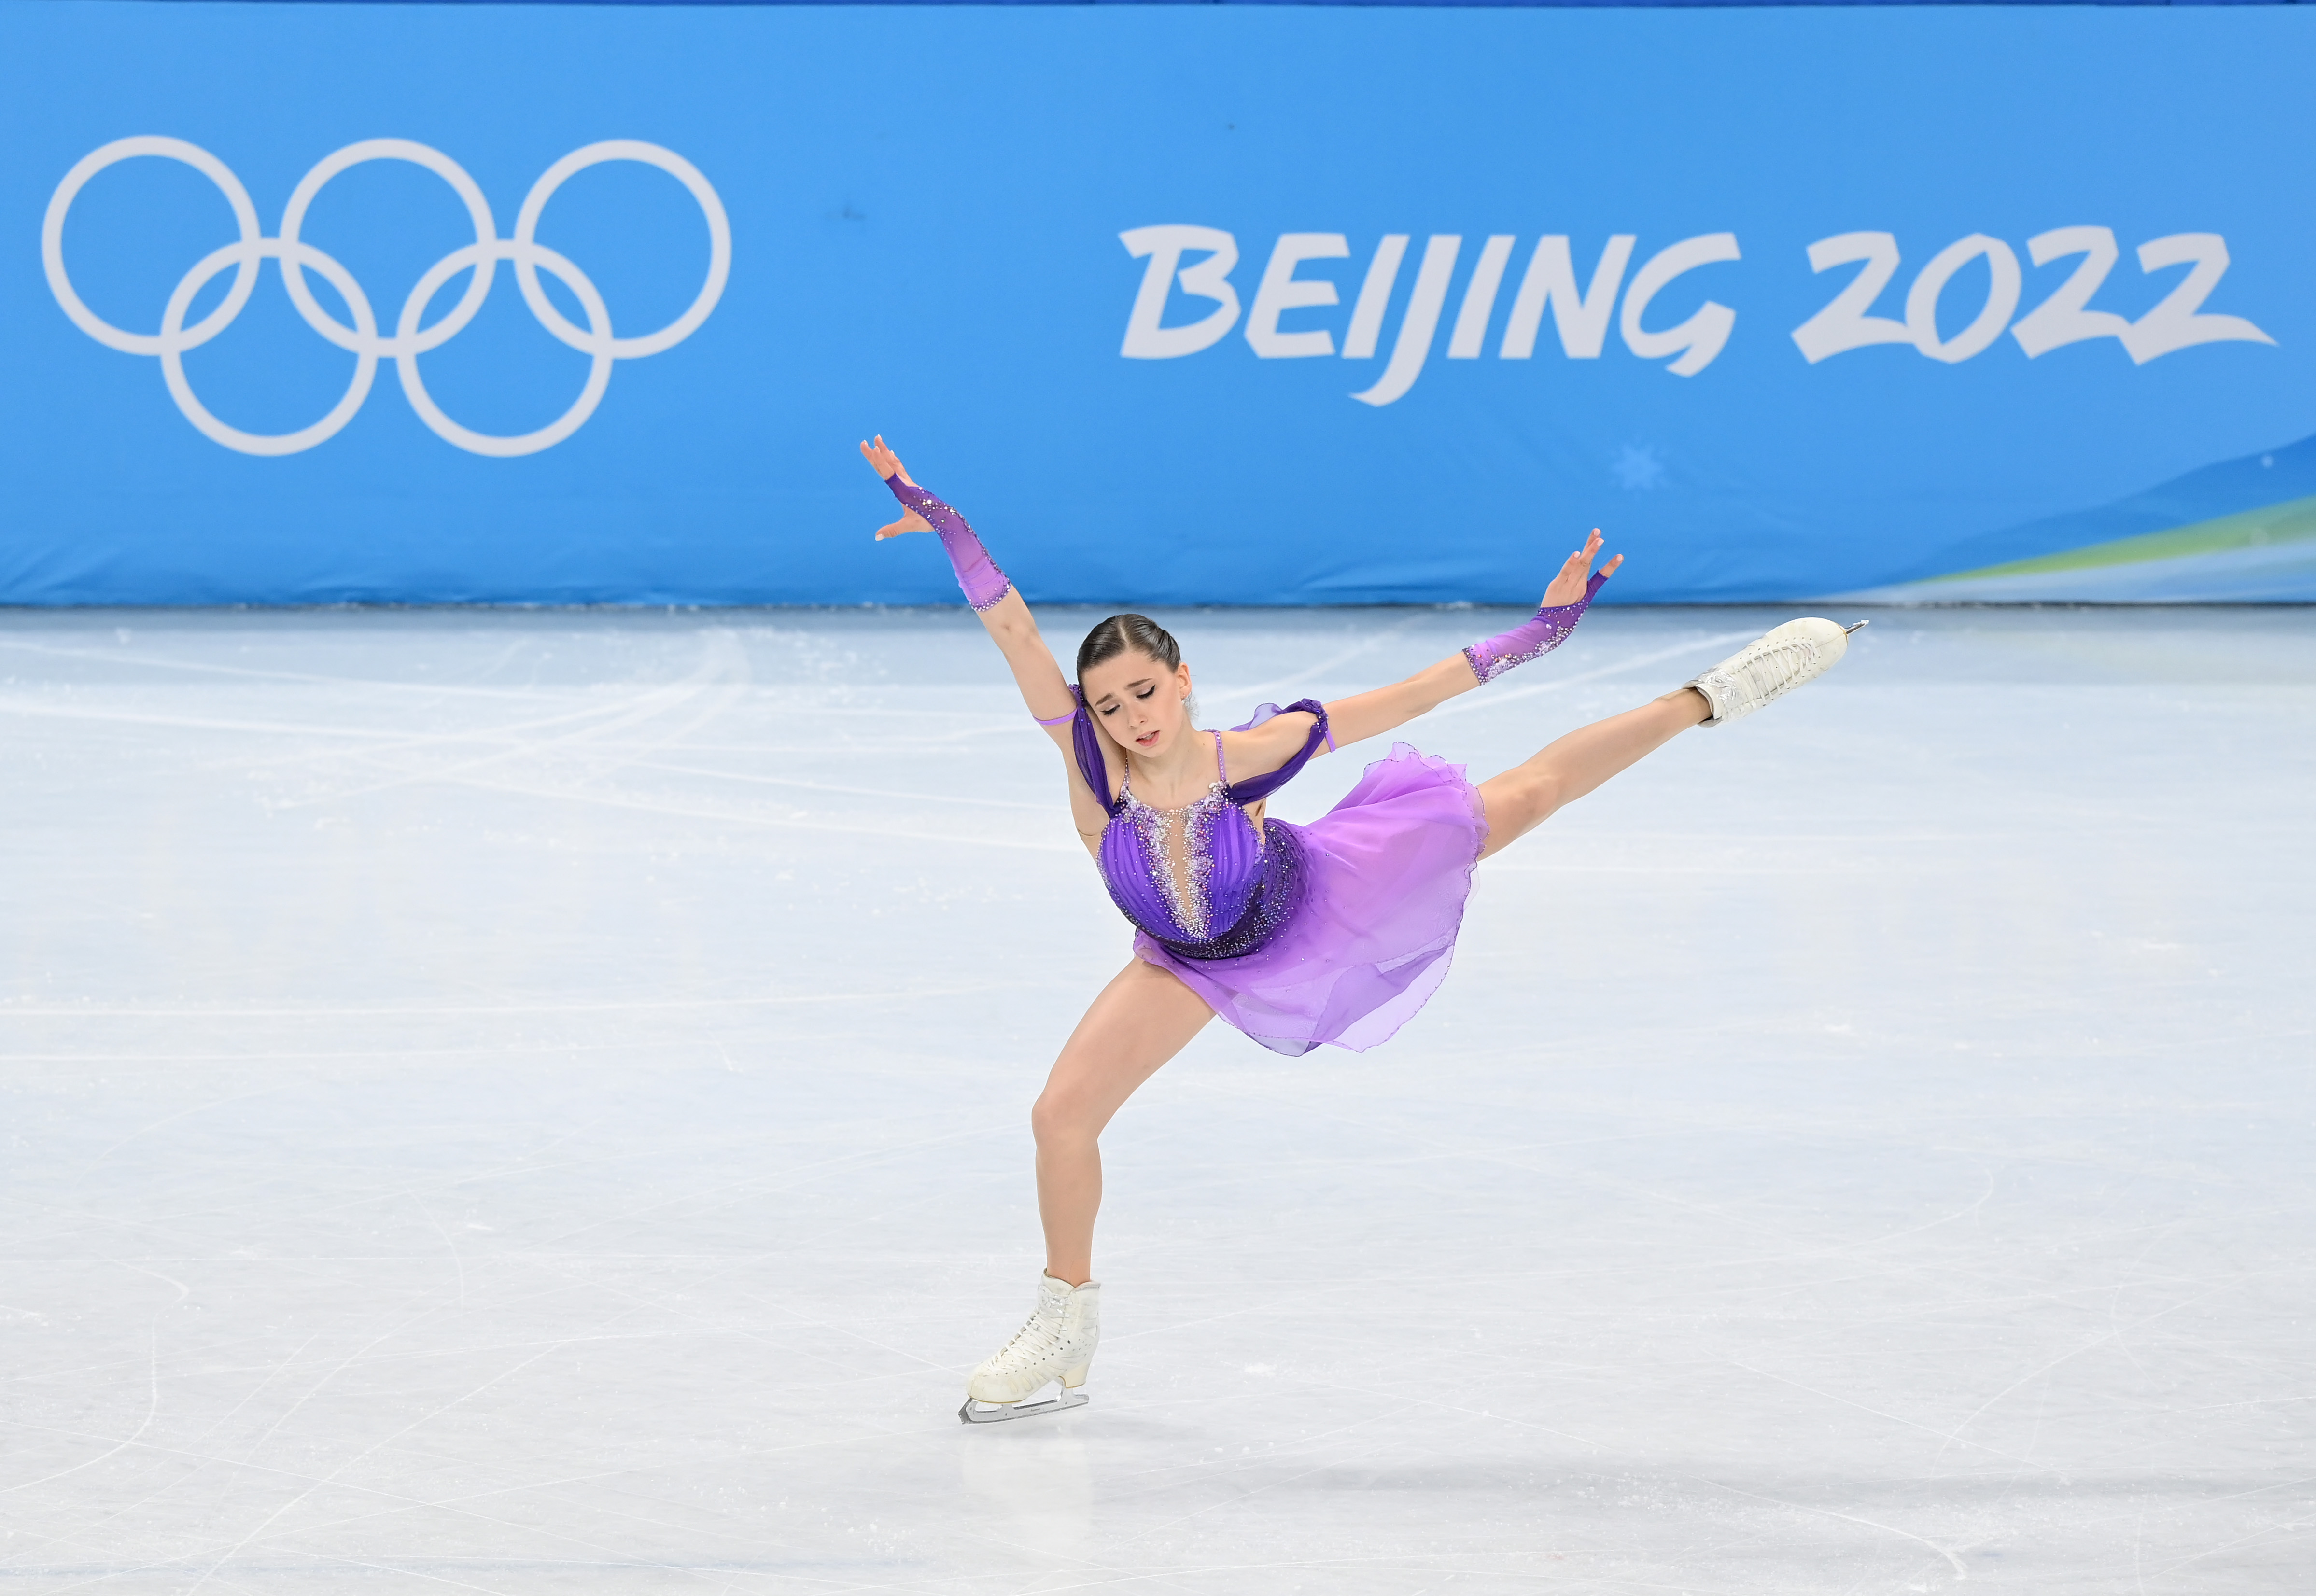 Olympics 2022 How Many Quads Will We See in the Womens Free Skate?